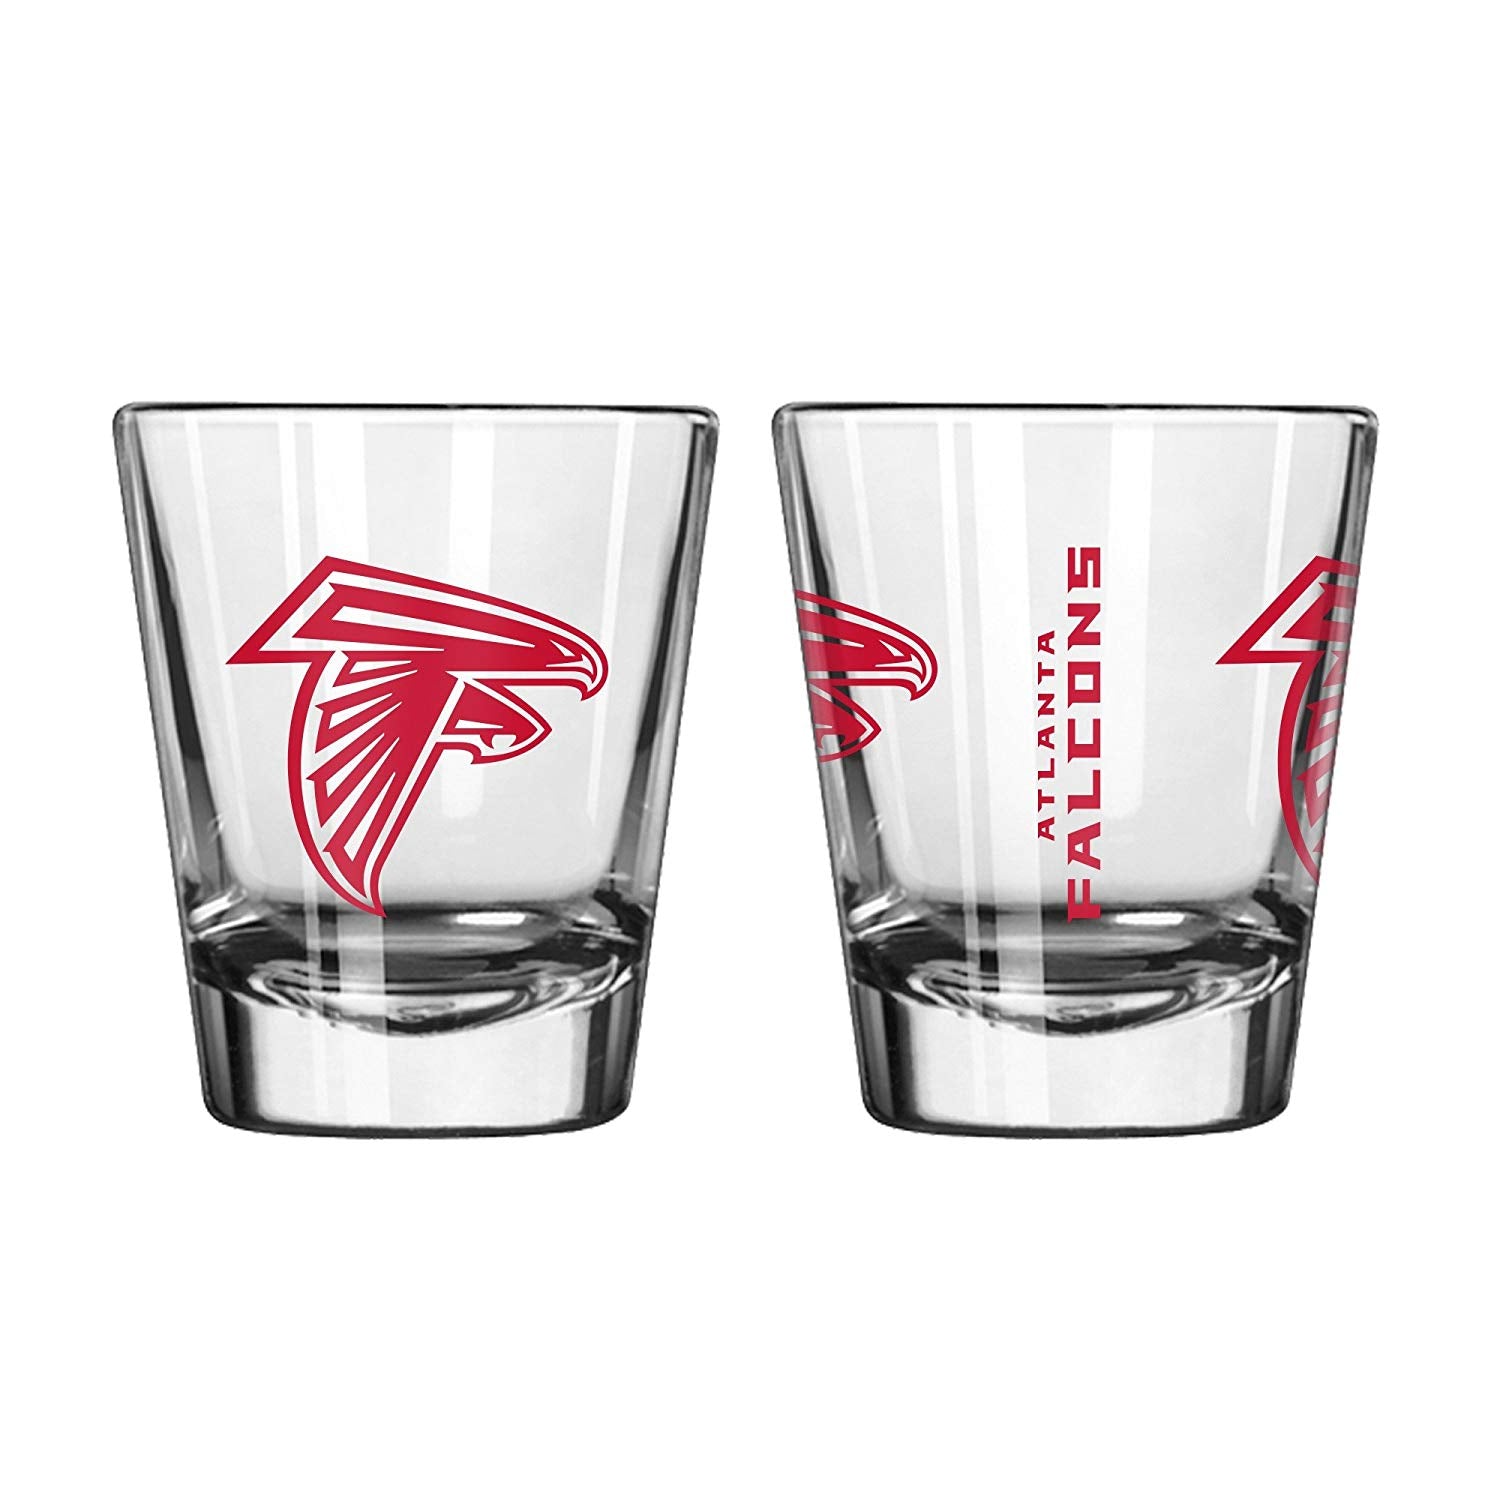 Official Fan Shop Authentic NFL Logo 2 oz Shot Glasses 2-Pack Bundle. Show Team Pride at Home, Your Bar or at The Tailgate. Gameday Shot Glasses for a Goodnight